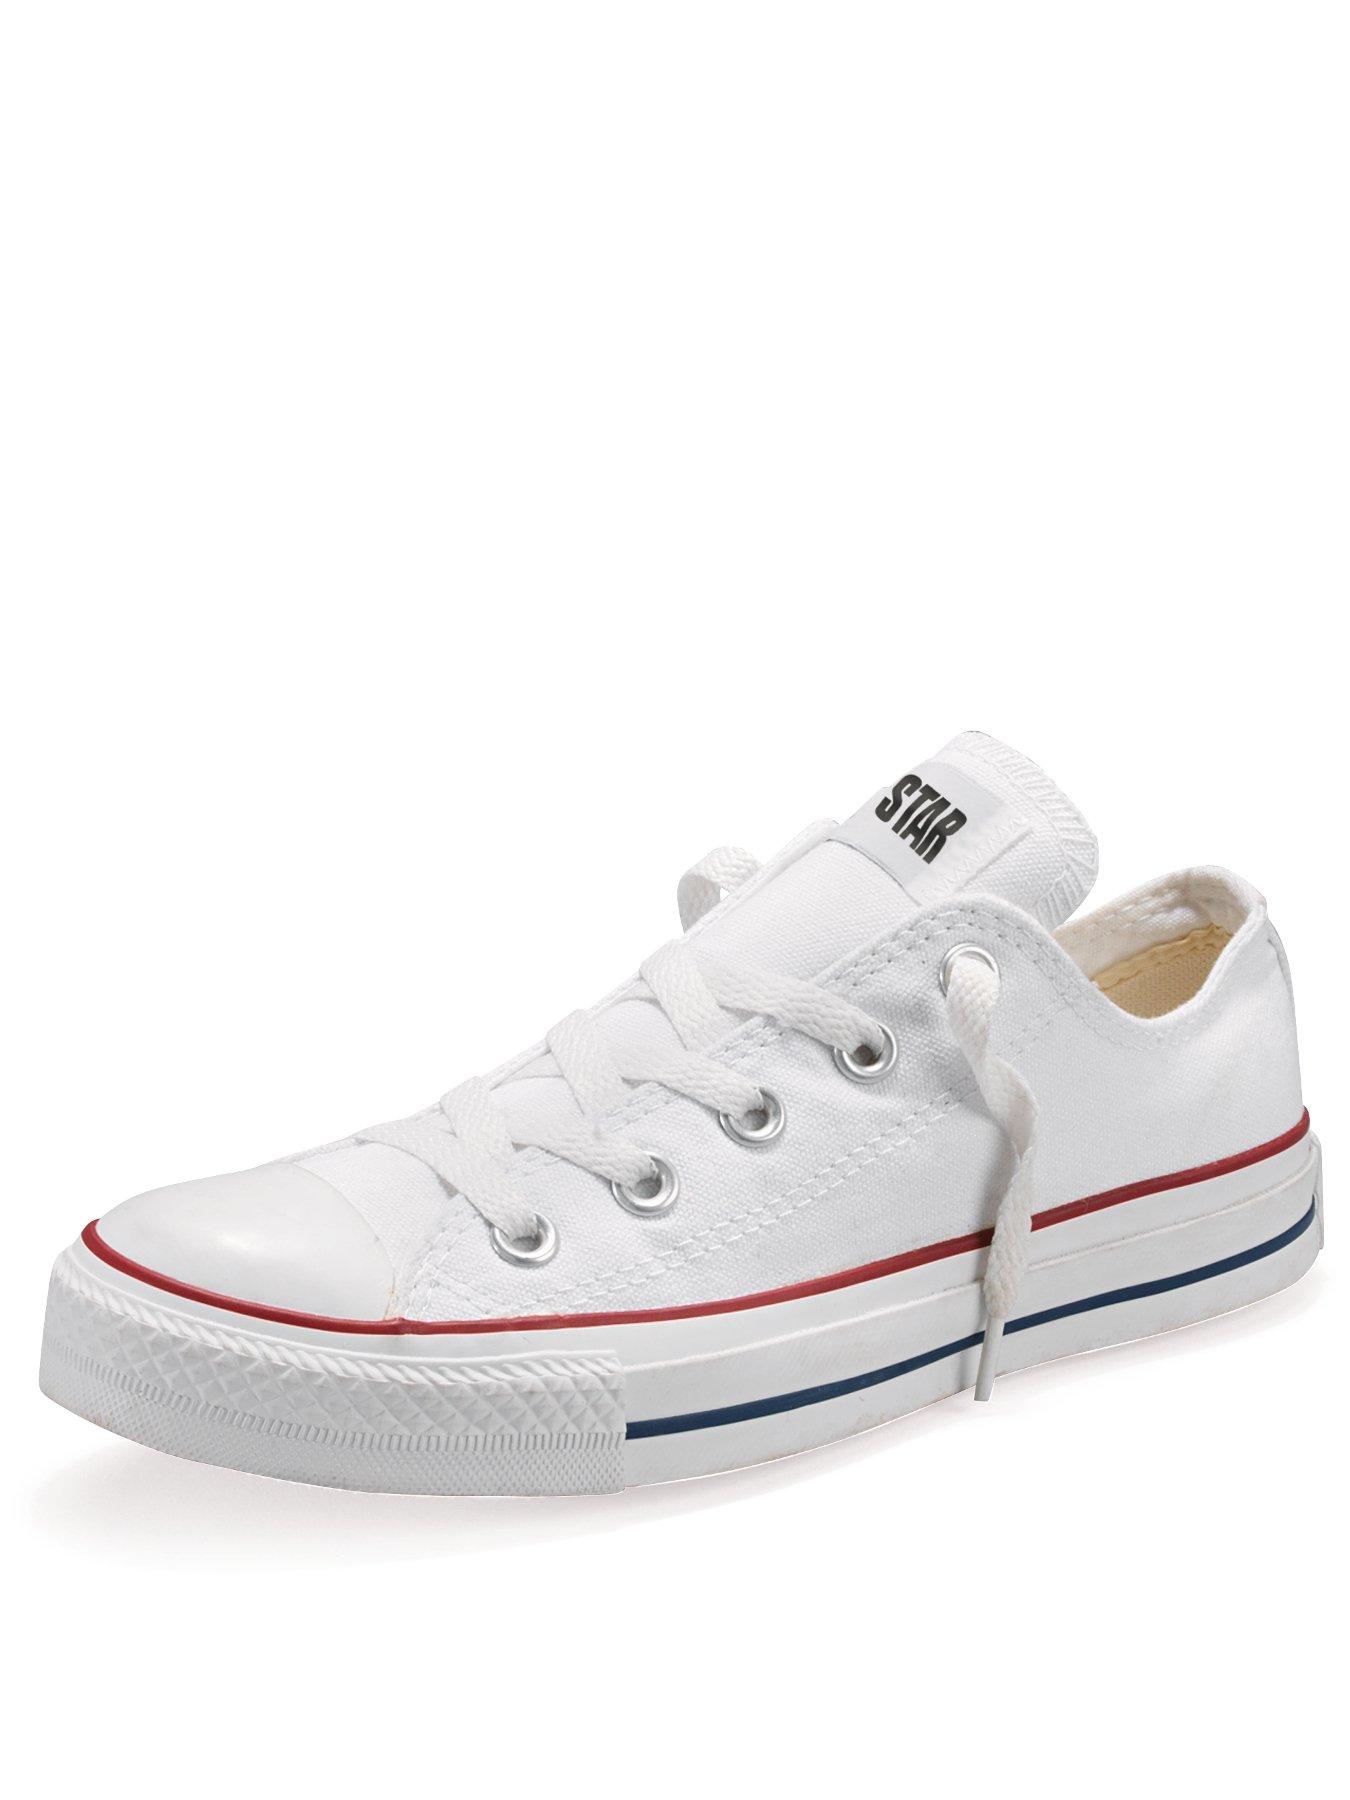 childrens leather converse trainers